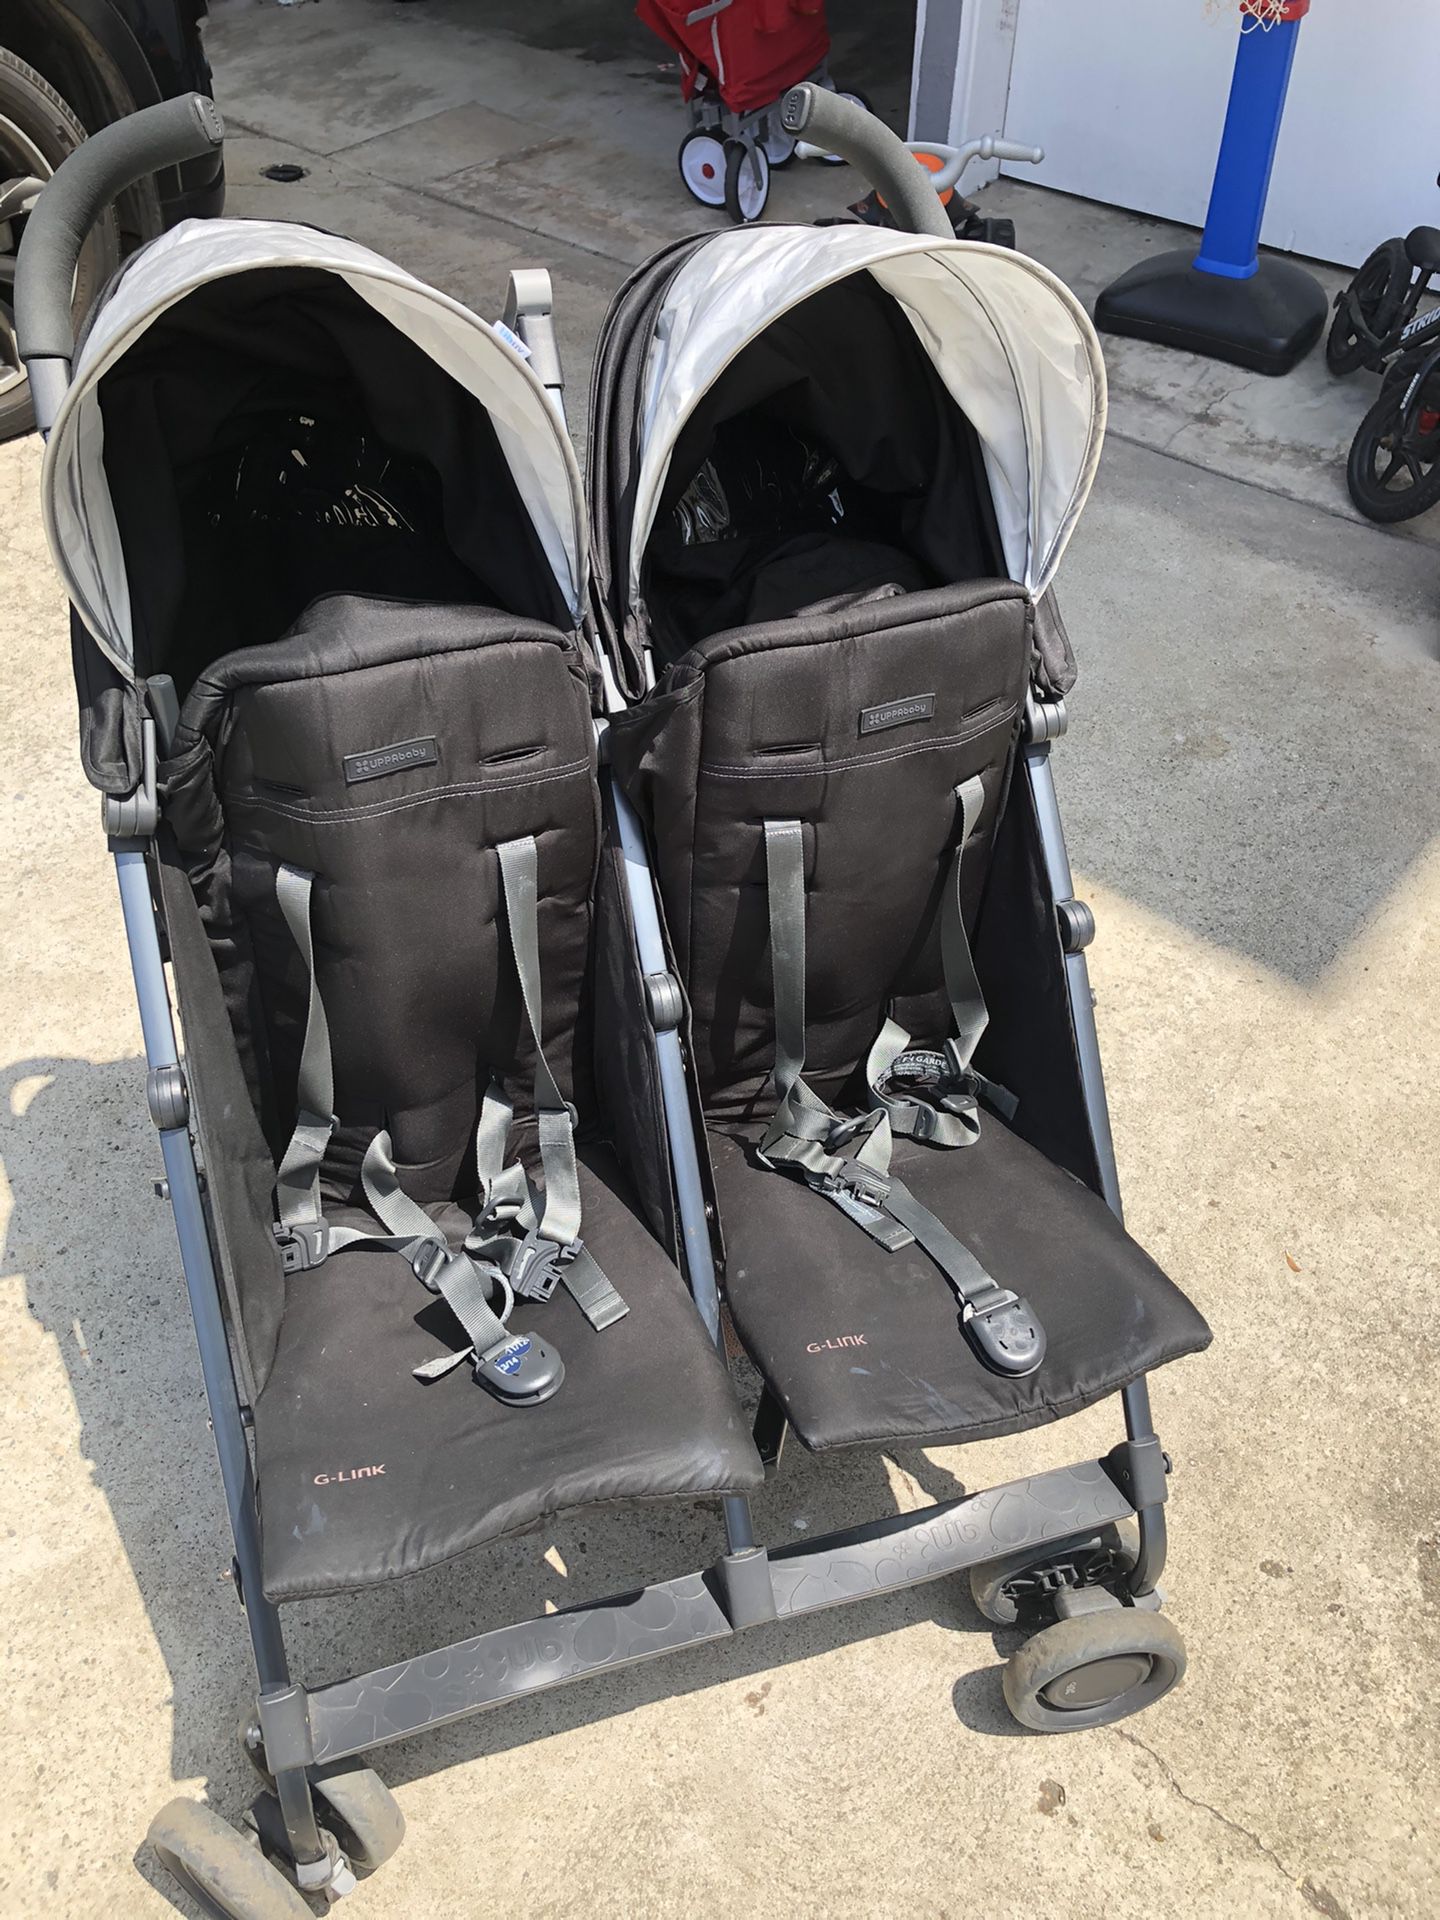 UppaBaby G-link double stroller